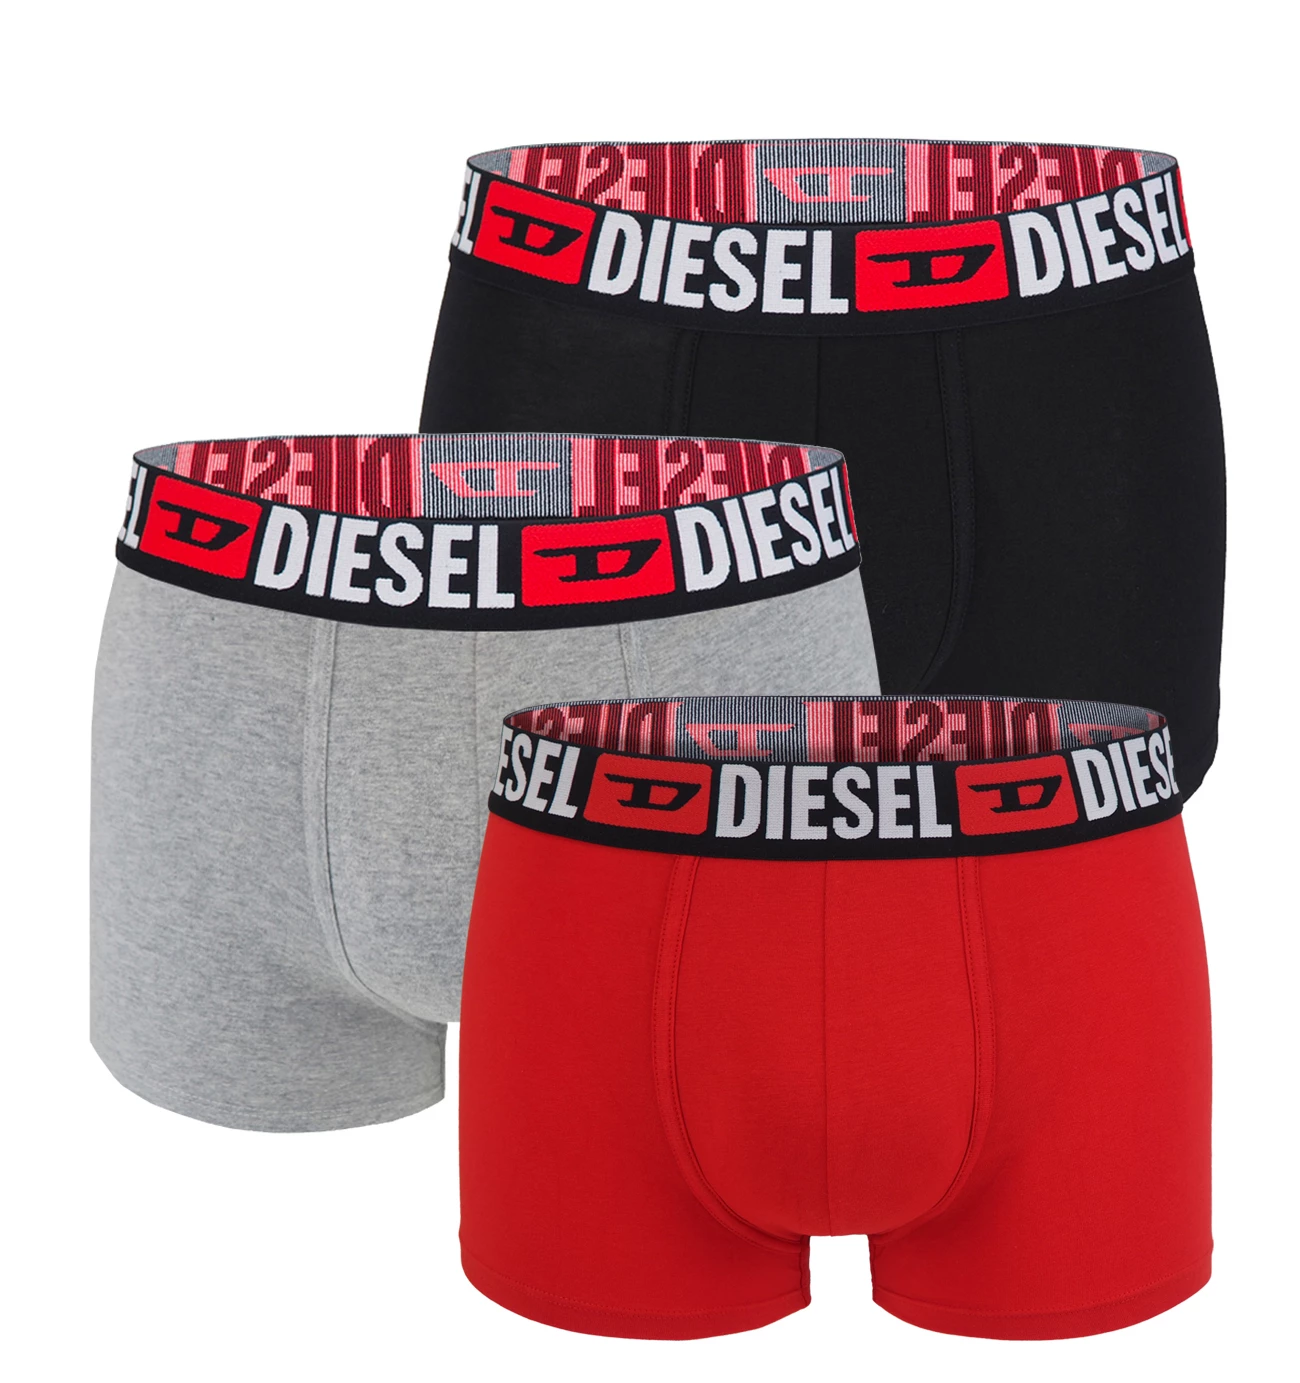 DIESEL - boxerky 3PACK cotton stretch black, red, gray